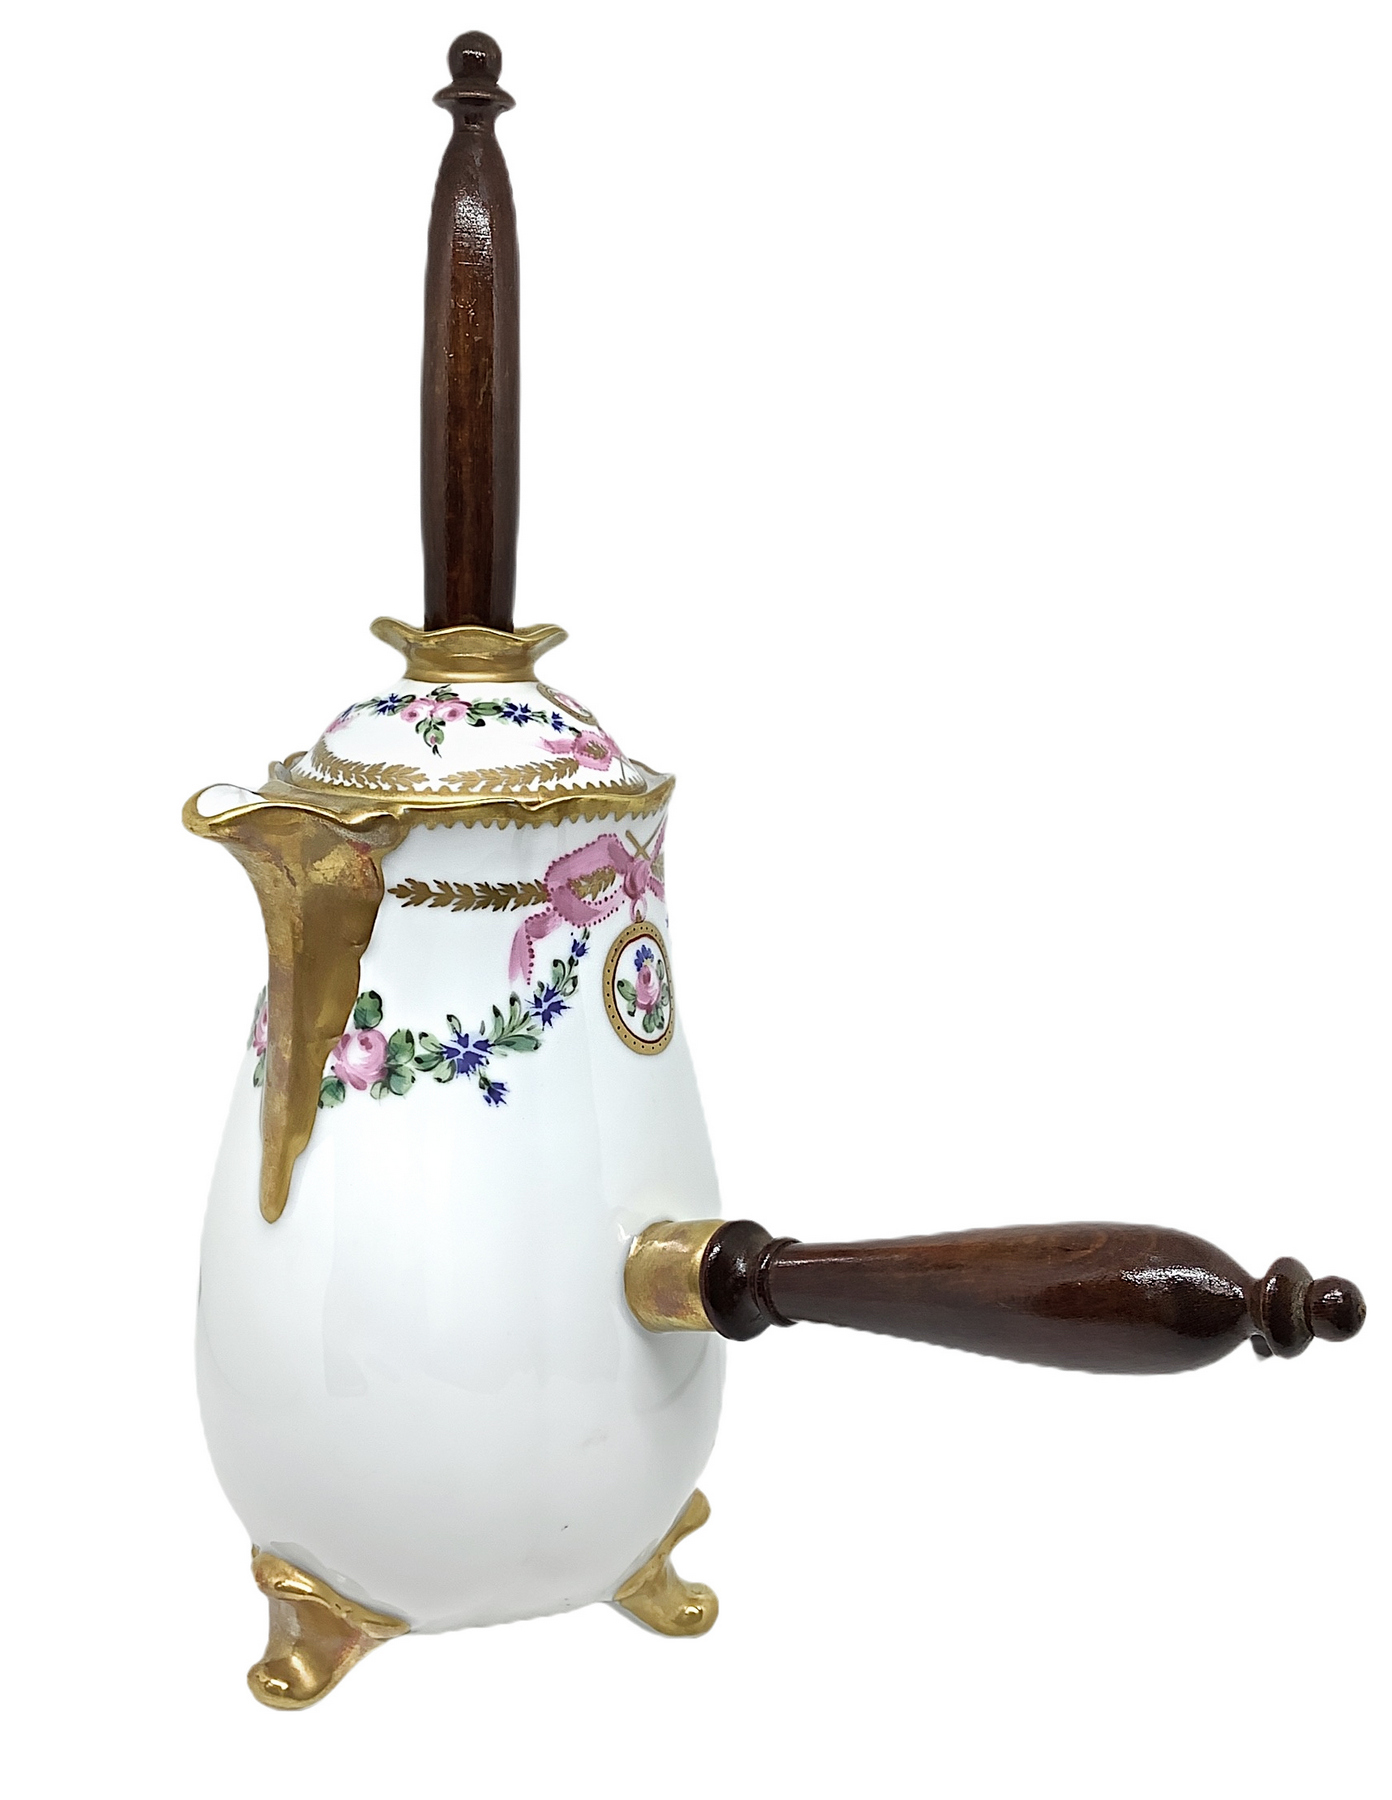 Milk jug with emulsifier, white Limoges porcelain decorated in gold and polychrome, wooden handle. 5